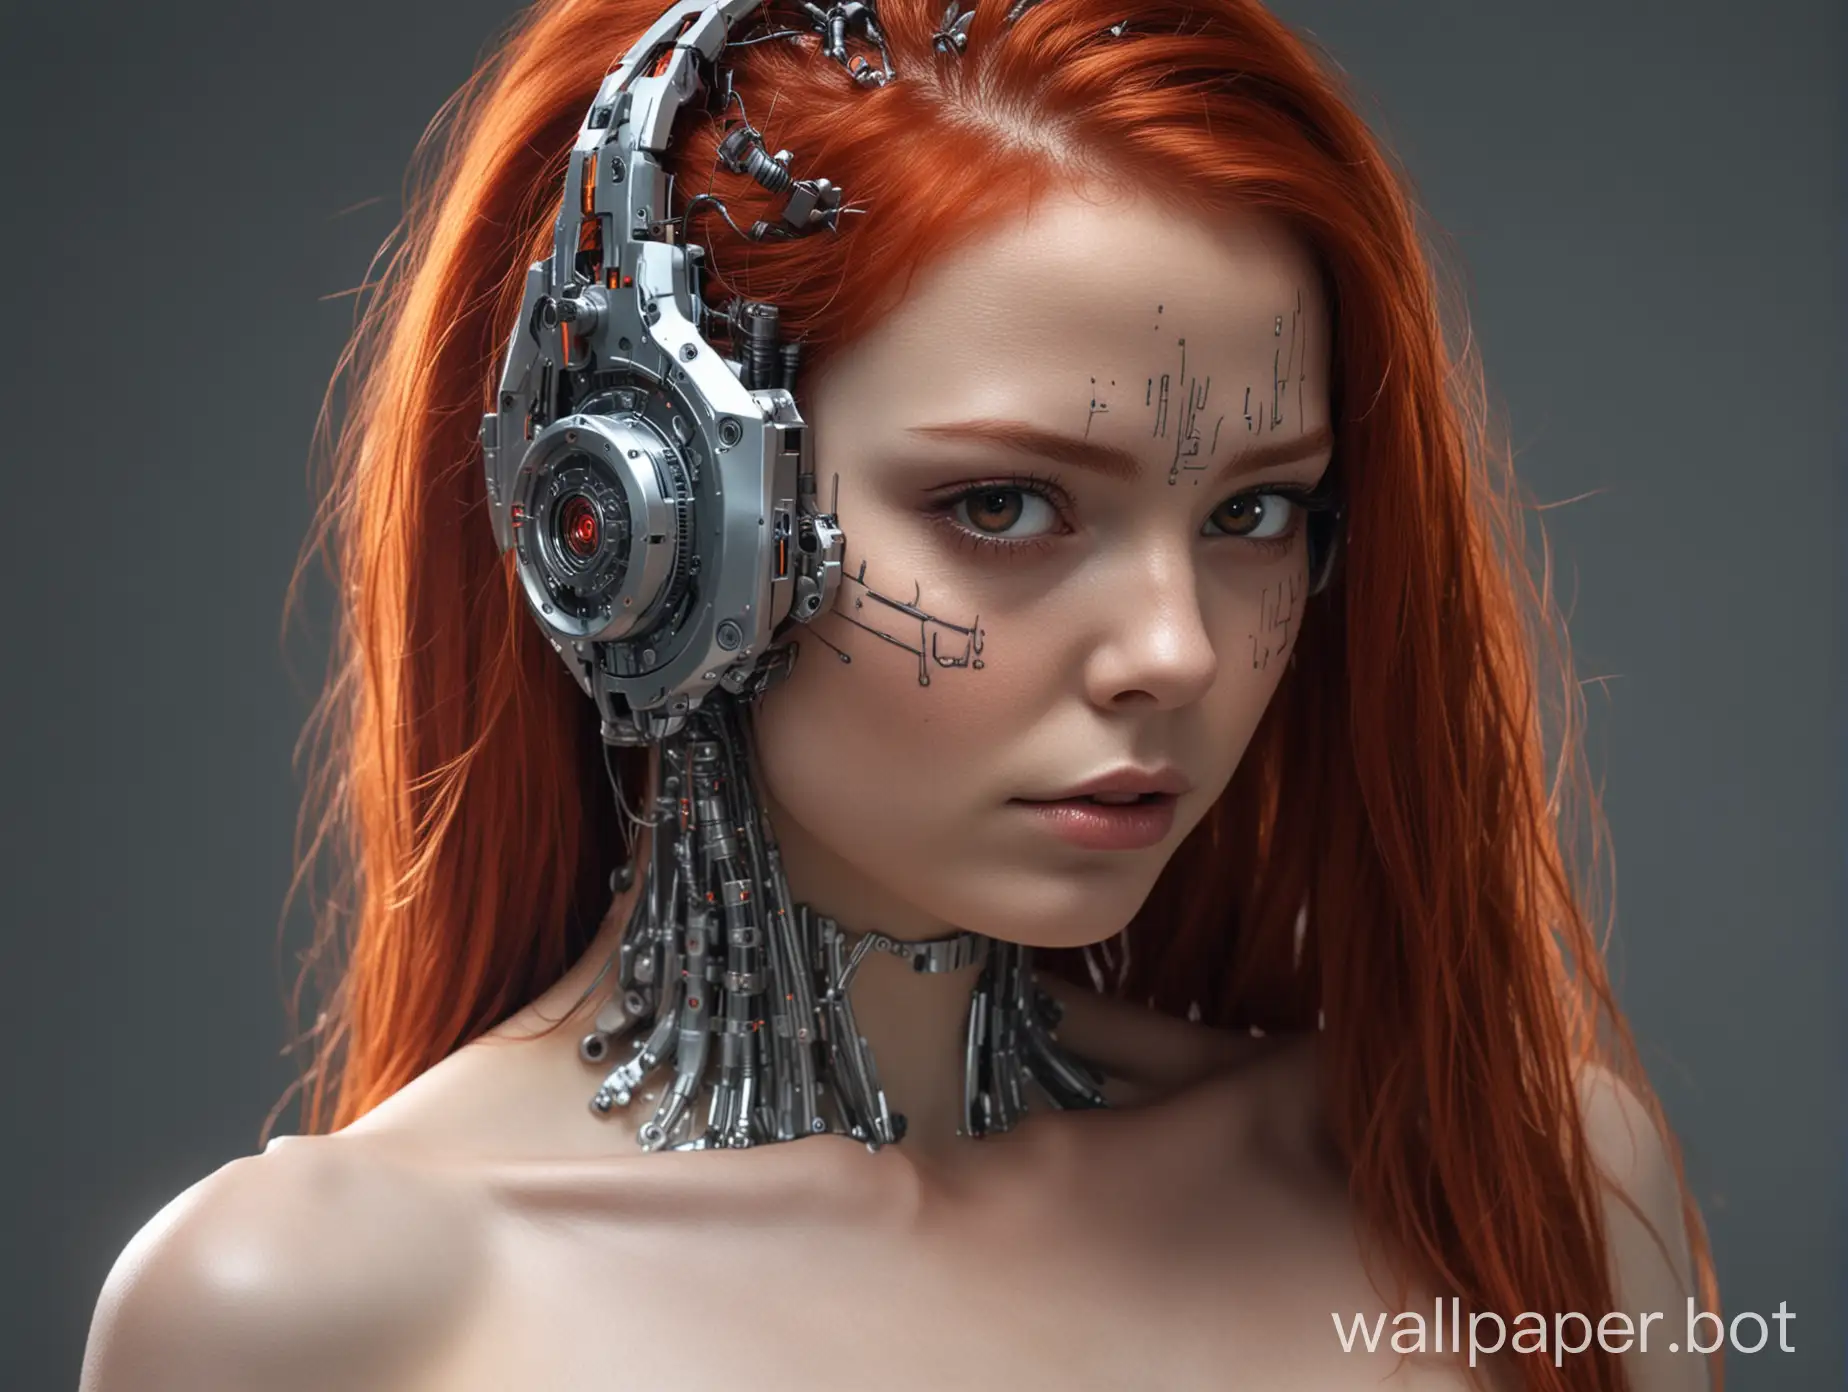 naked girl cyborg shoots laser from eyes, cyber implants all over body, long fiery red hair grows, full growth, side view